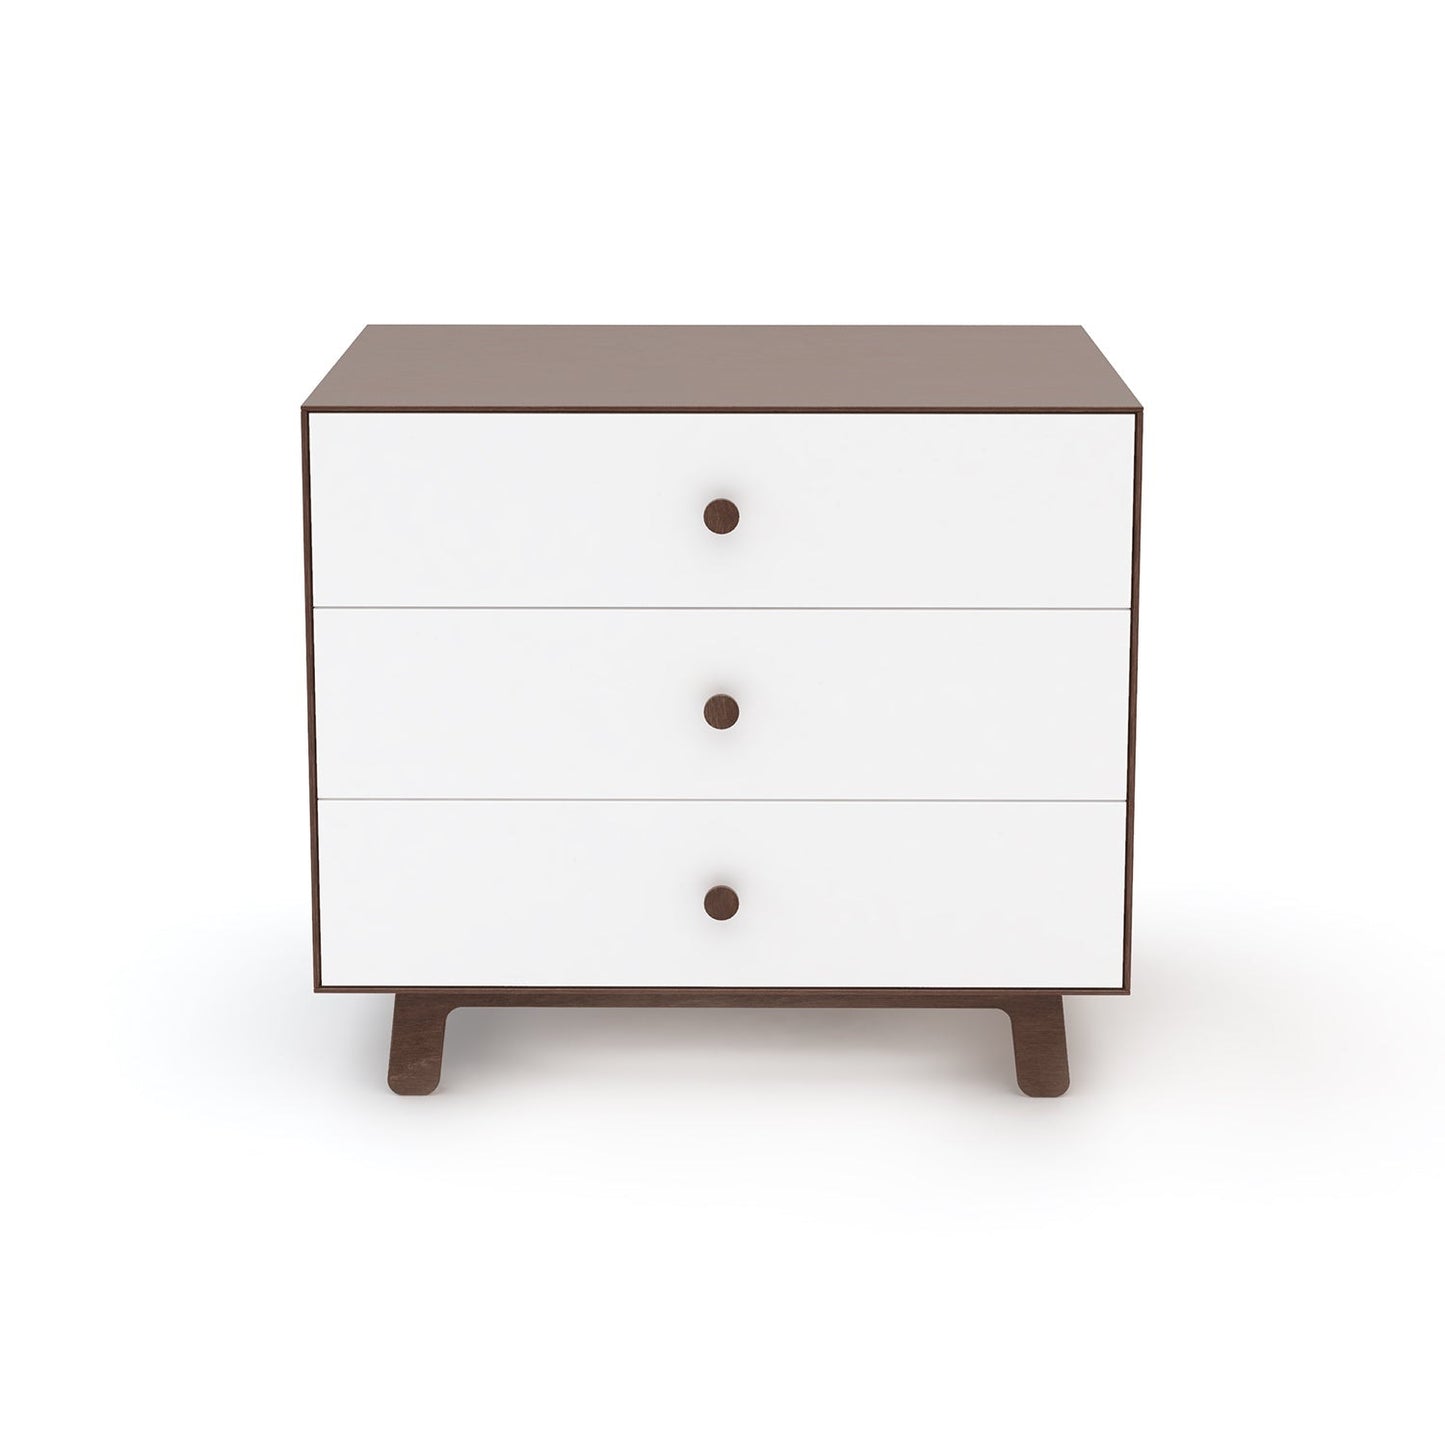 Oeuf NYC Merlin 3 Drawer Dresser - Sparrow Legs (3 Colours Available)